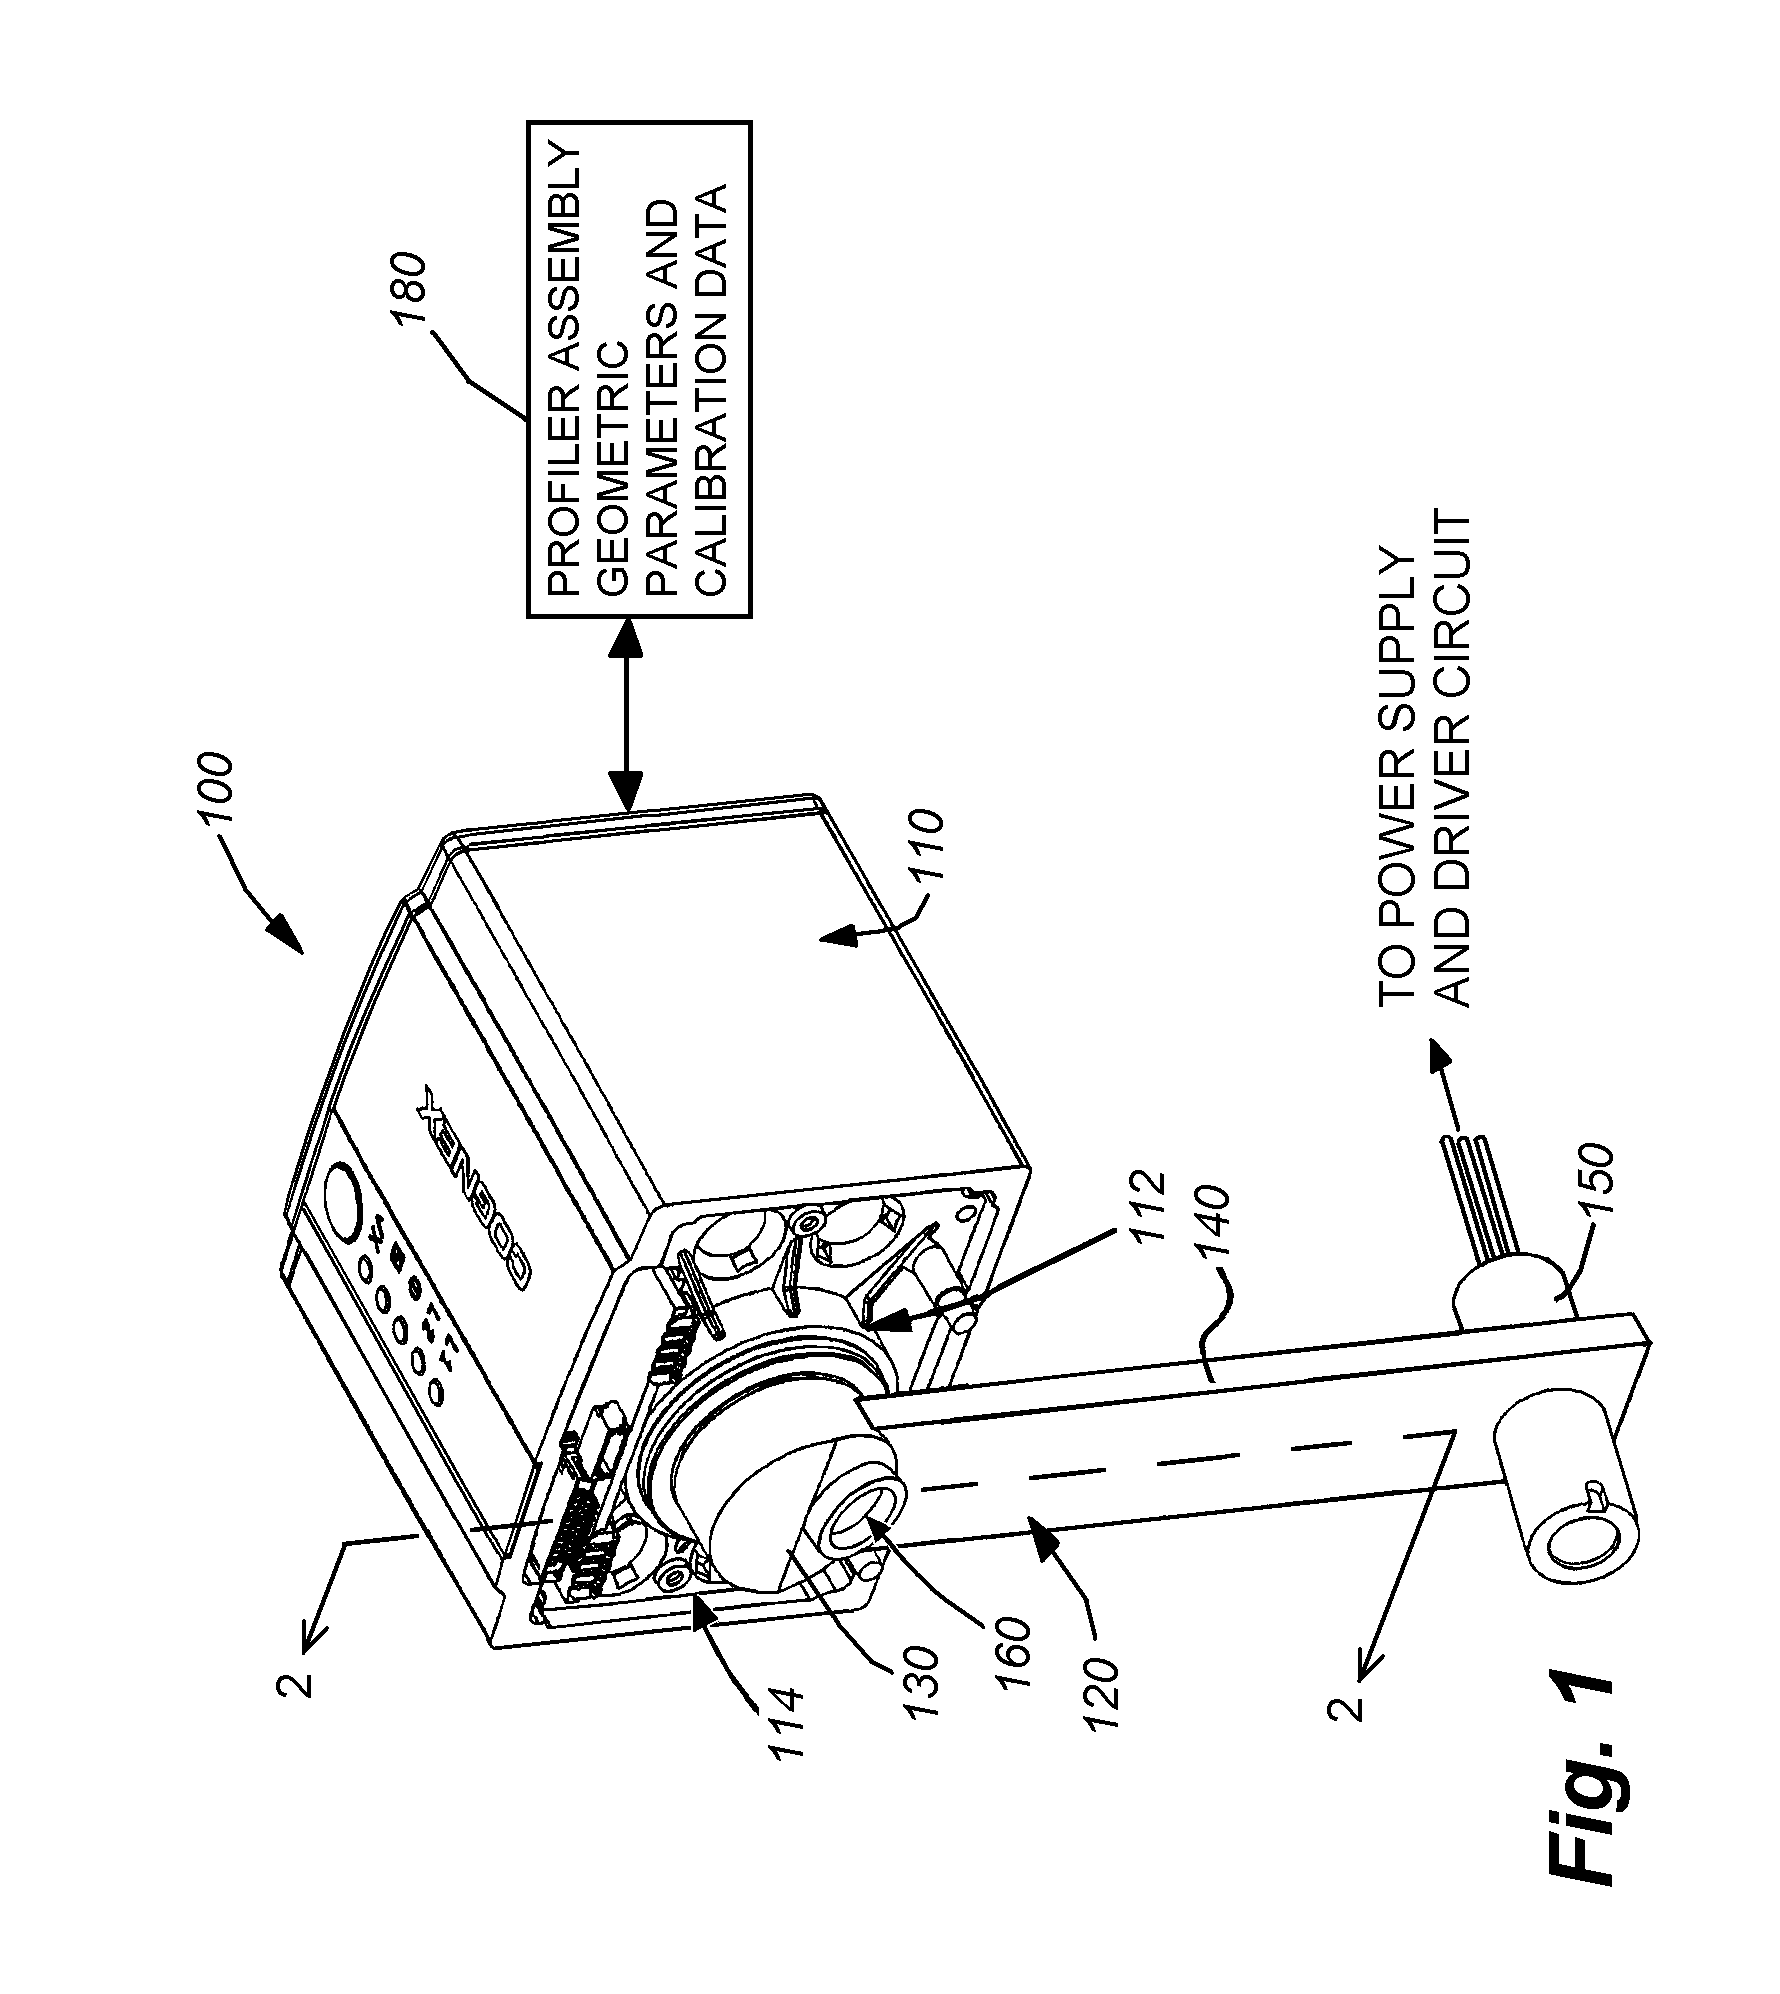 Laser profiling attachment for a vision system camera